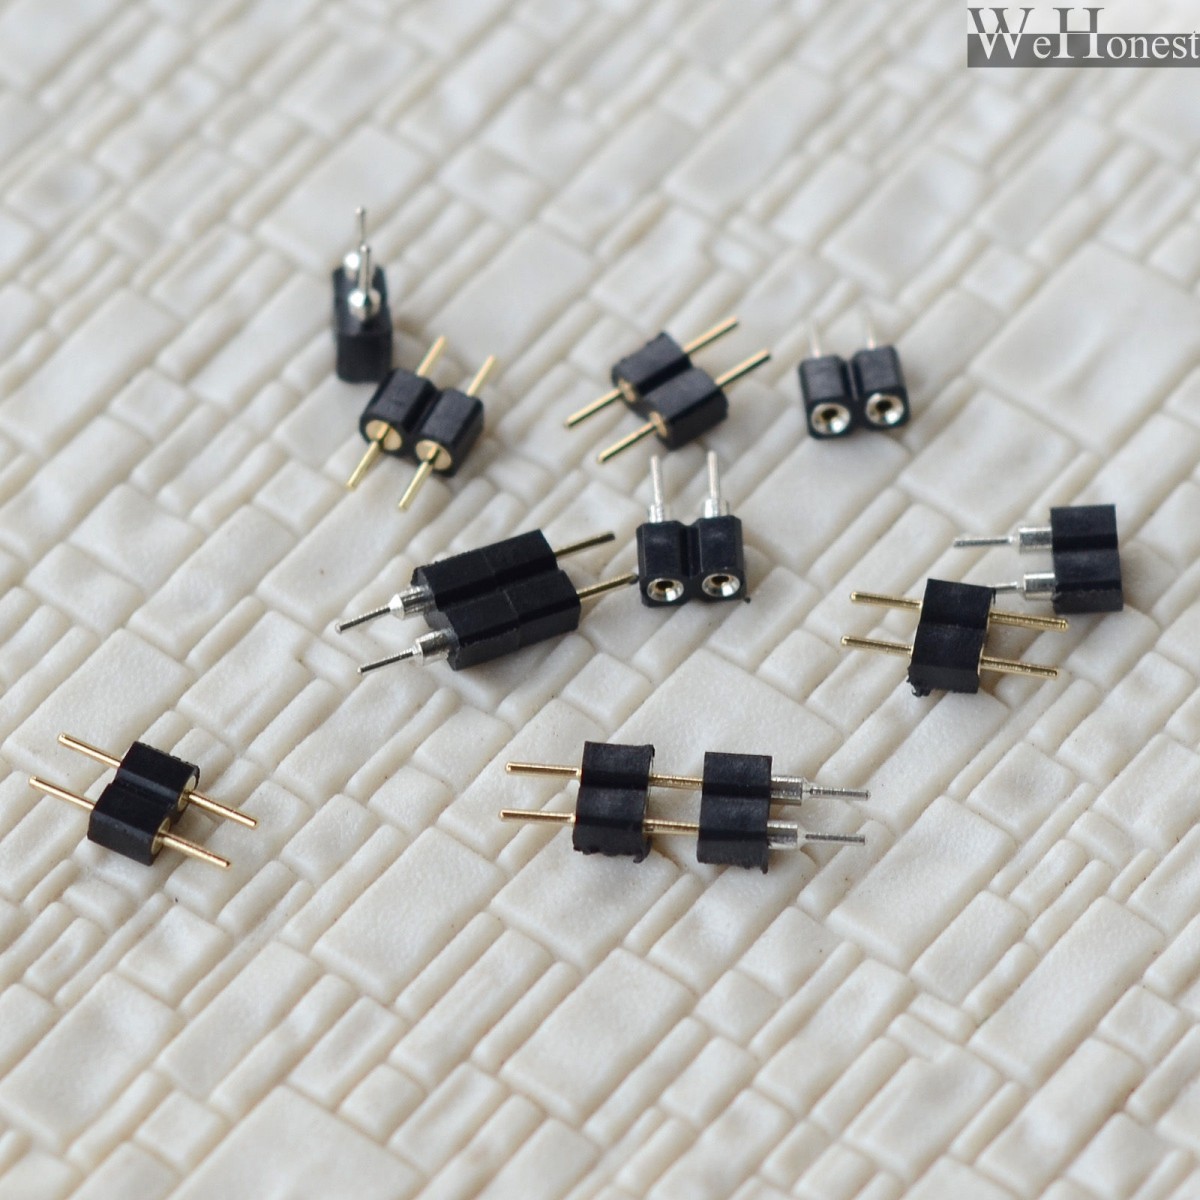 10 pairs 2 Pins mini-plug kits 2.54mm straight connectors round female and male